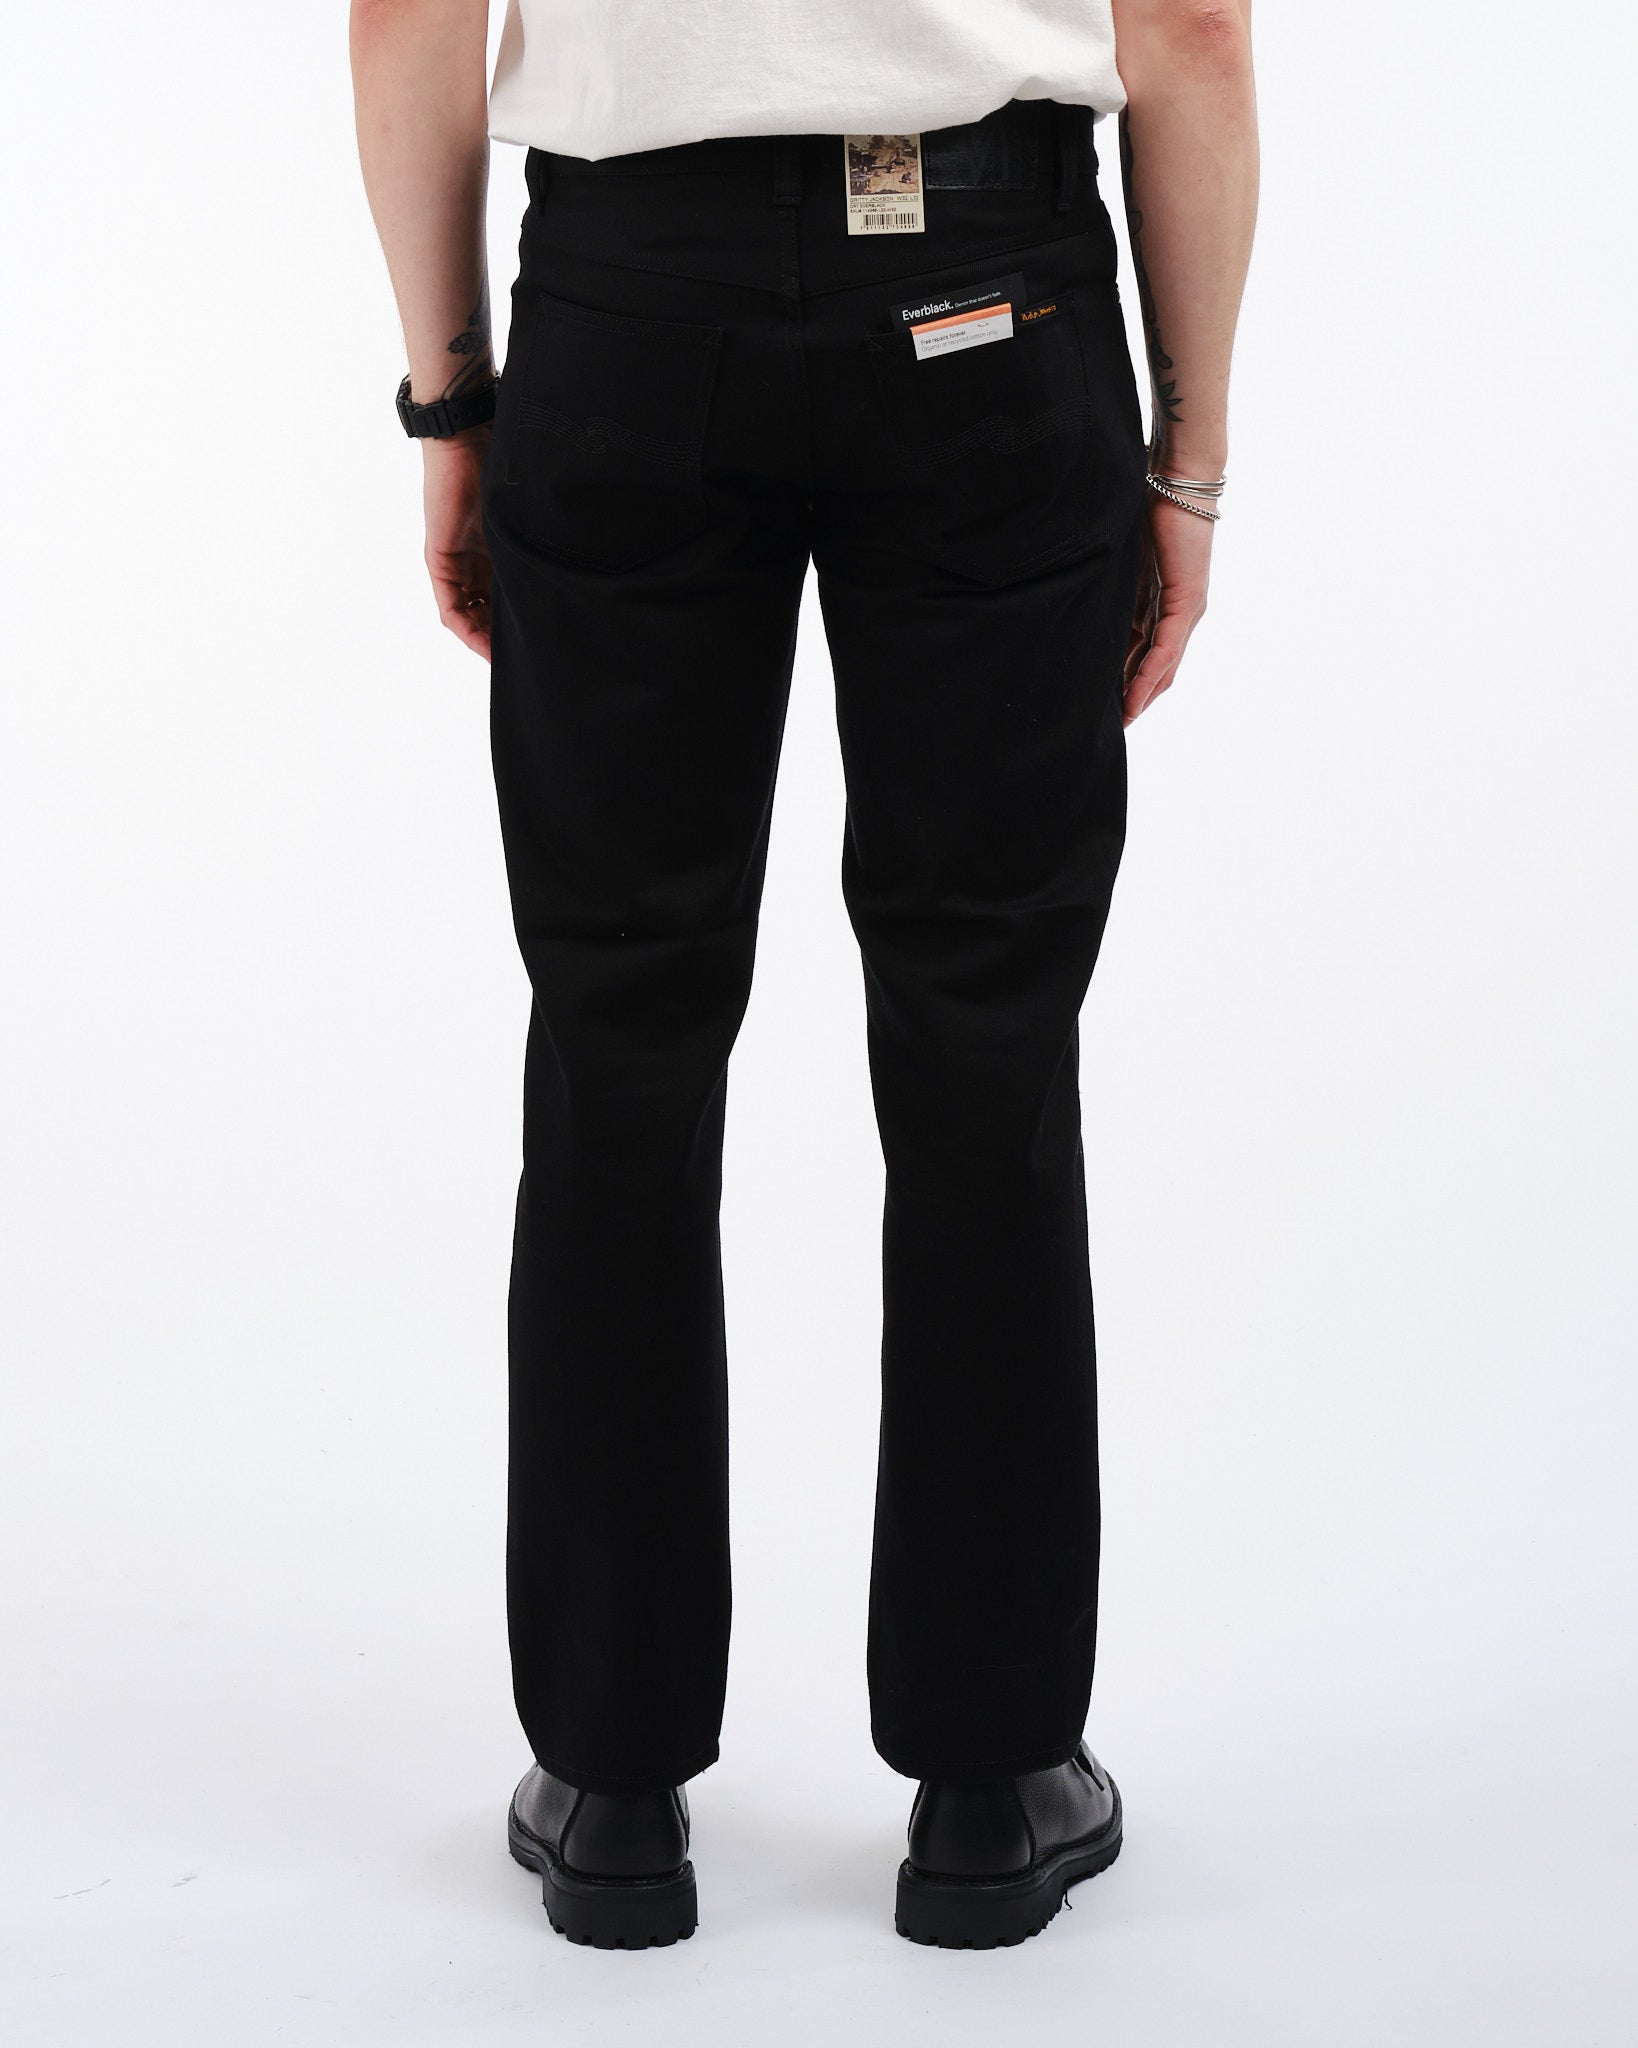 Gritty Jackson Jeans Dry Everblack - Meadow